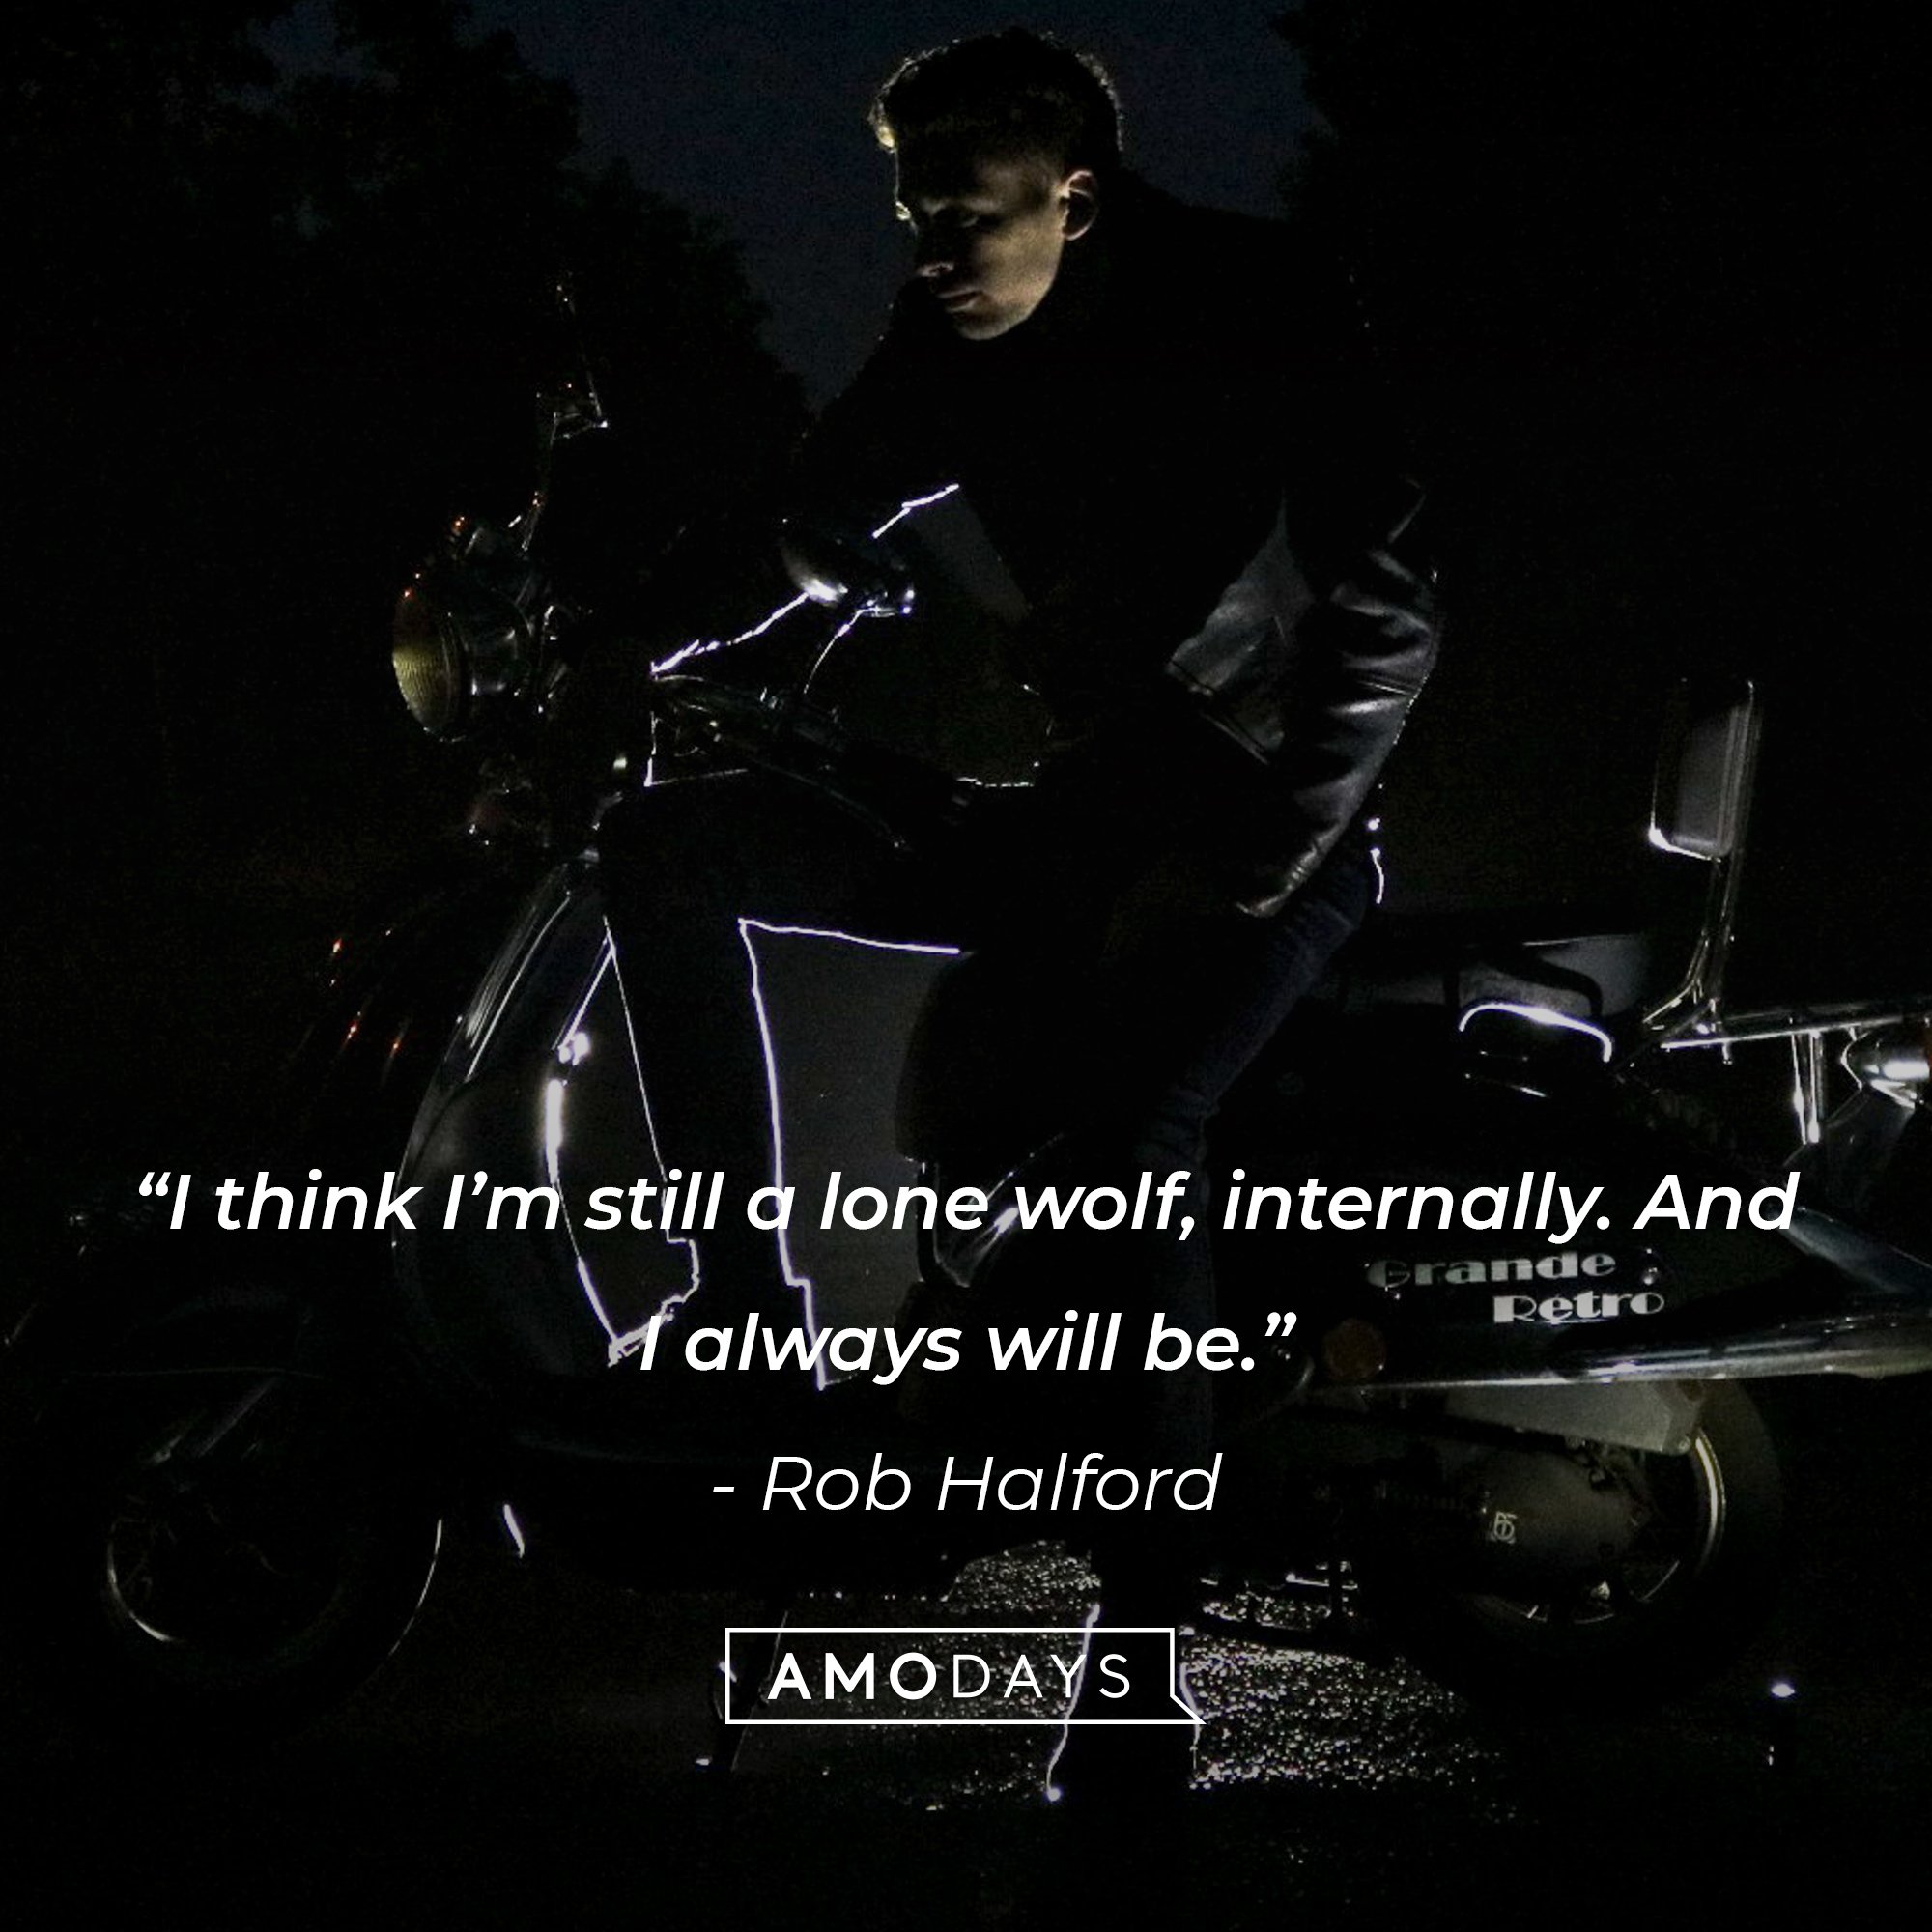  Rob Halford's quote: “I think I’m still a lone wolf, internally. And I always will be.” | Image: AmoDays